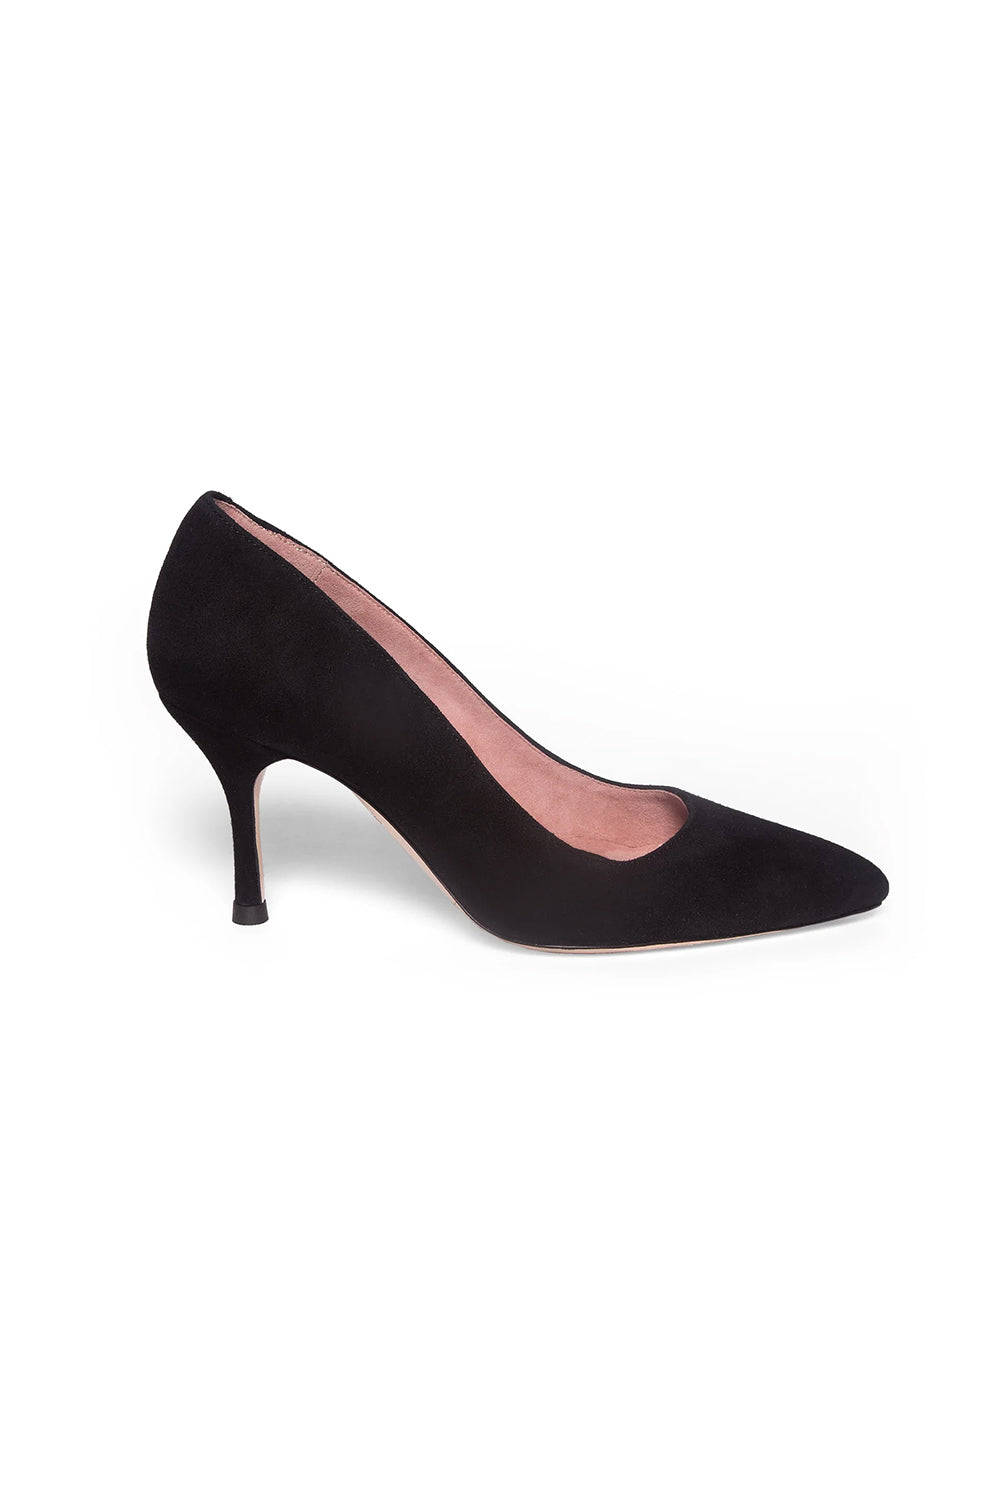 Women' Business Suede Pump - Black NORA GARDNER | OFFICIAL STORE for work and office